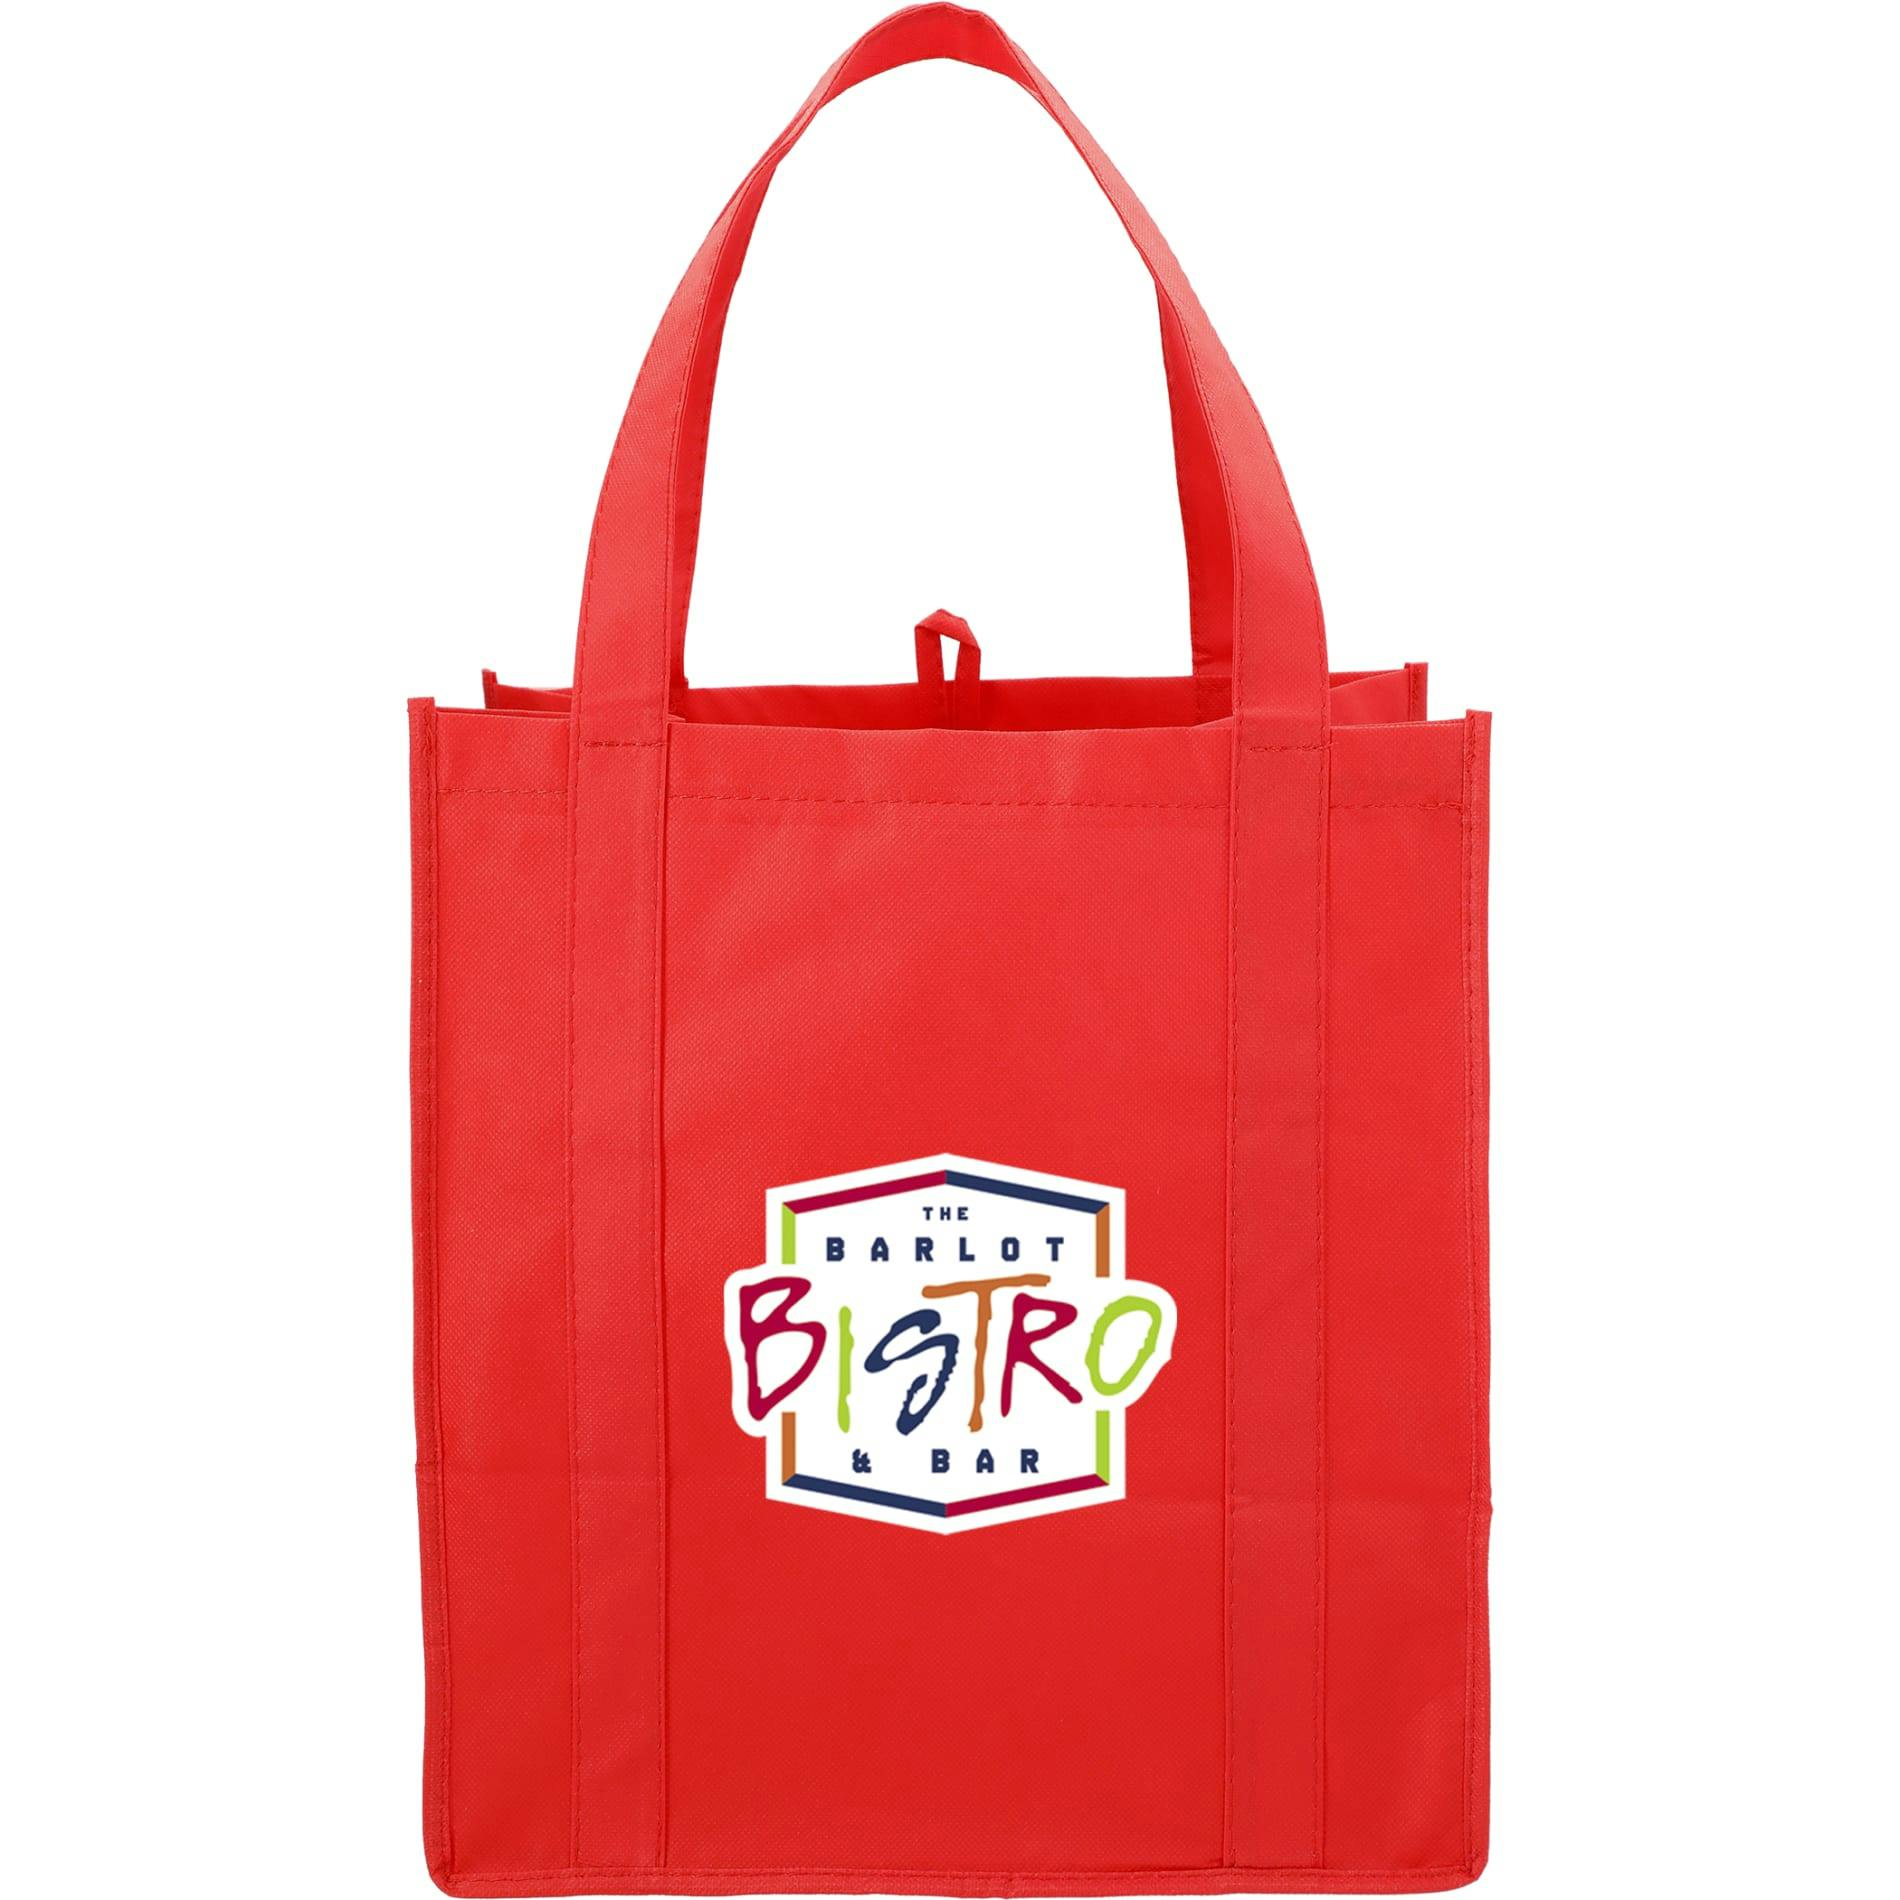 Hercules Non-Woven Grocery Tote - additional Image 5